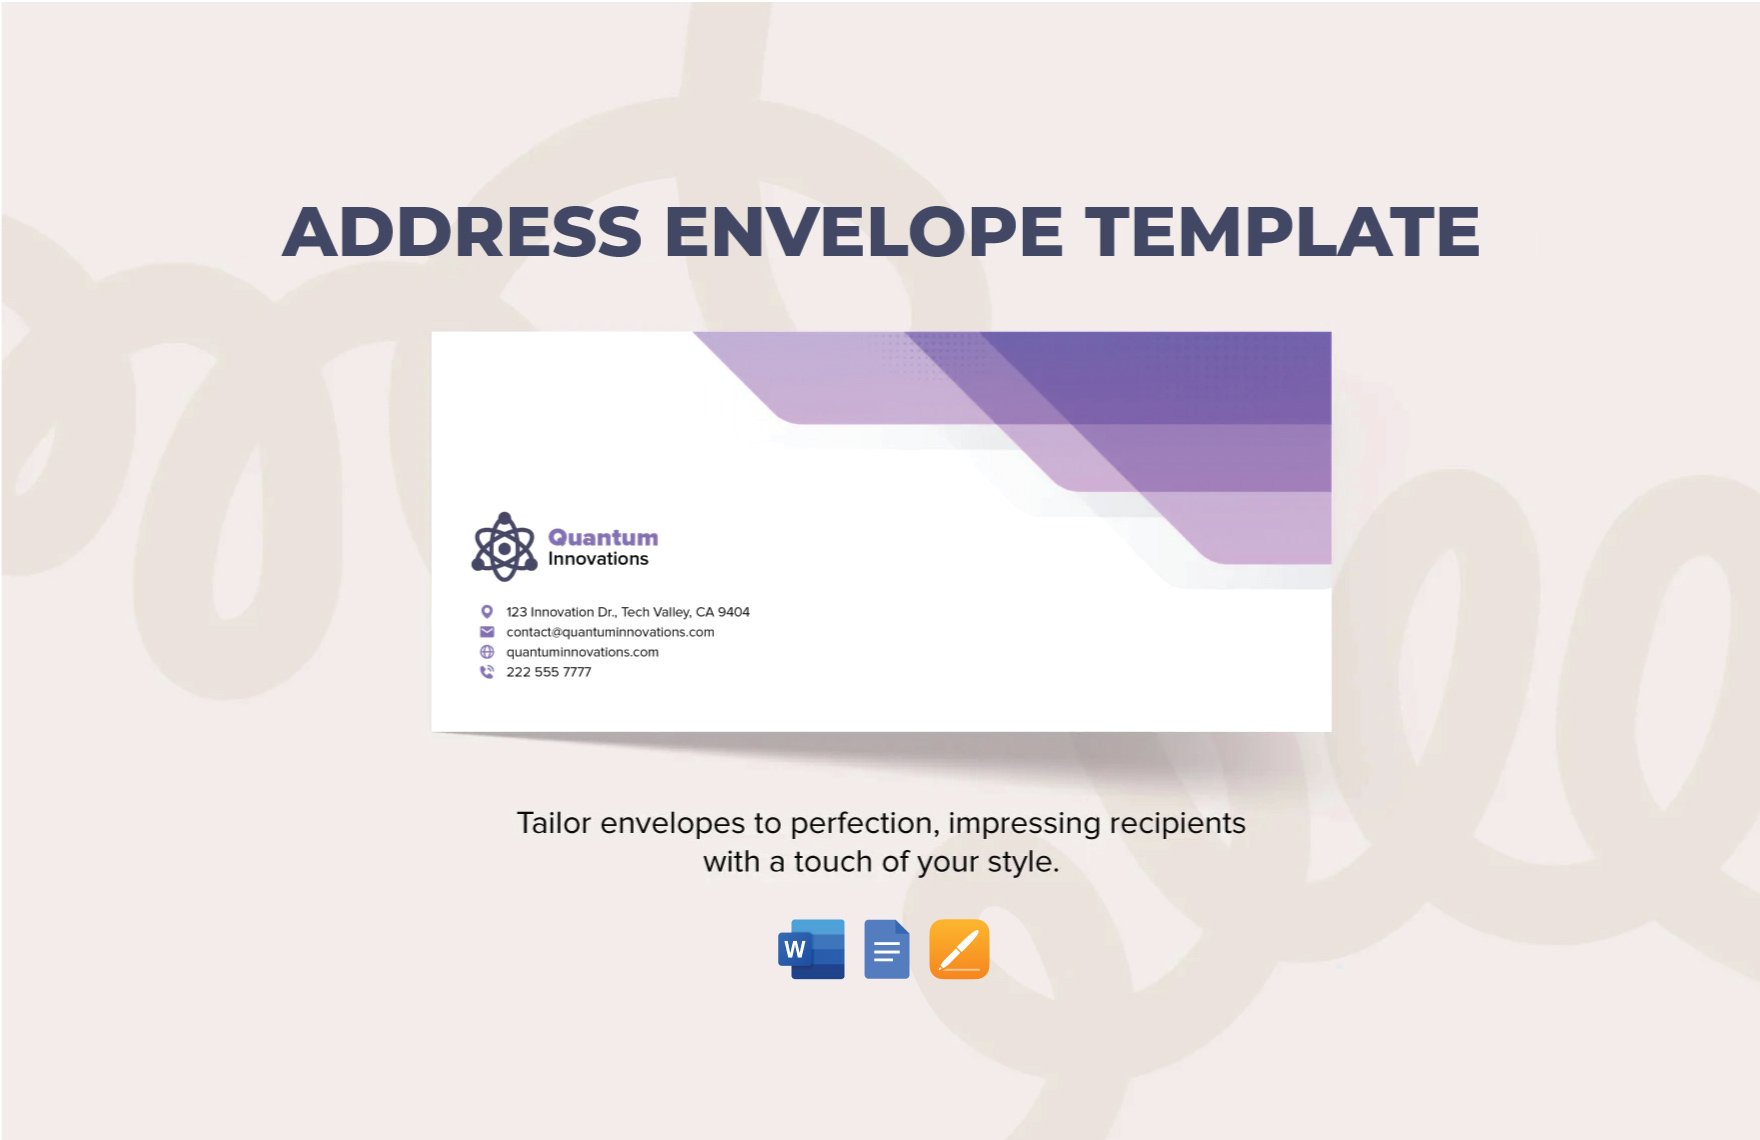 Free Address Envelope Template in Word, Google Docs, Apple Pages